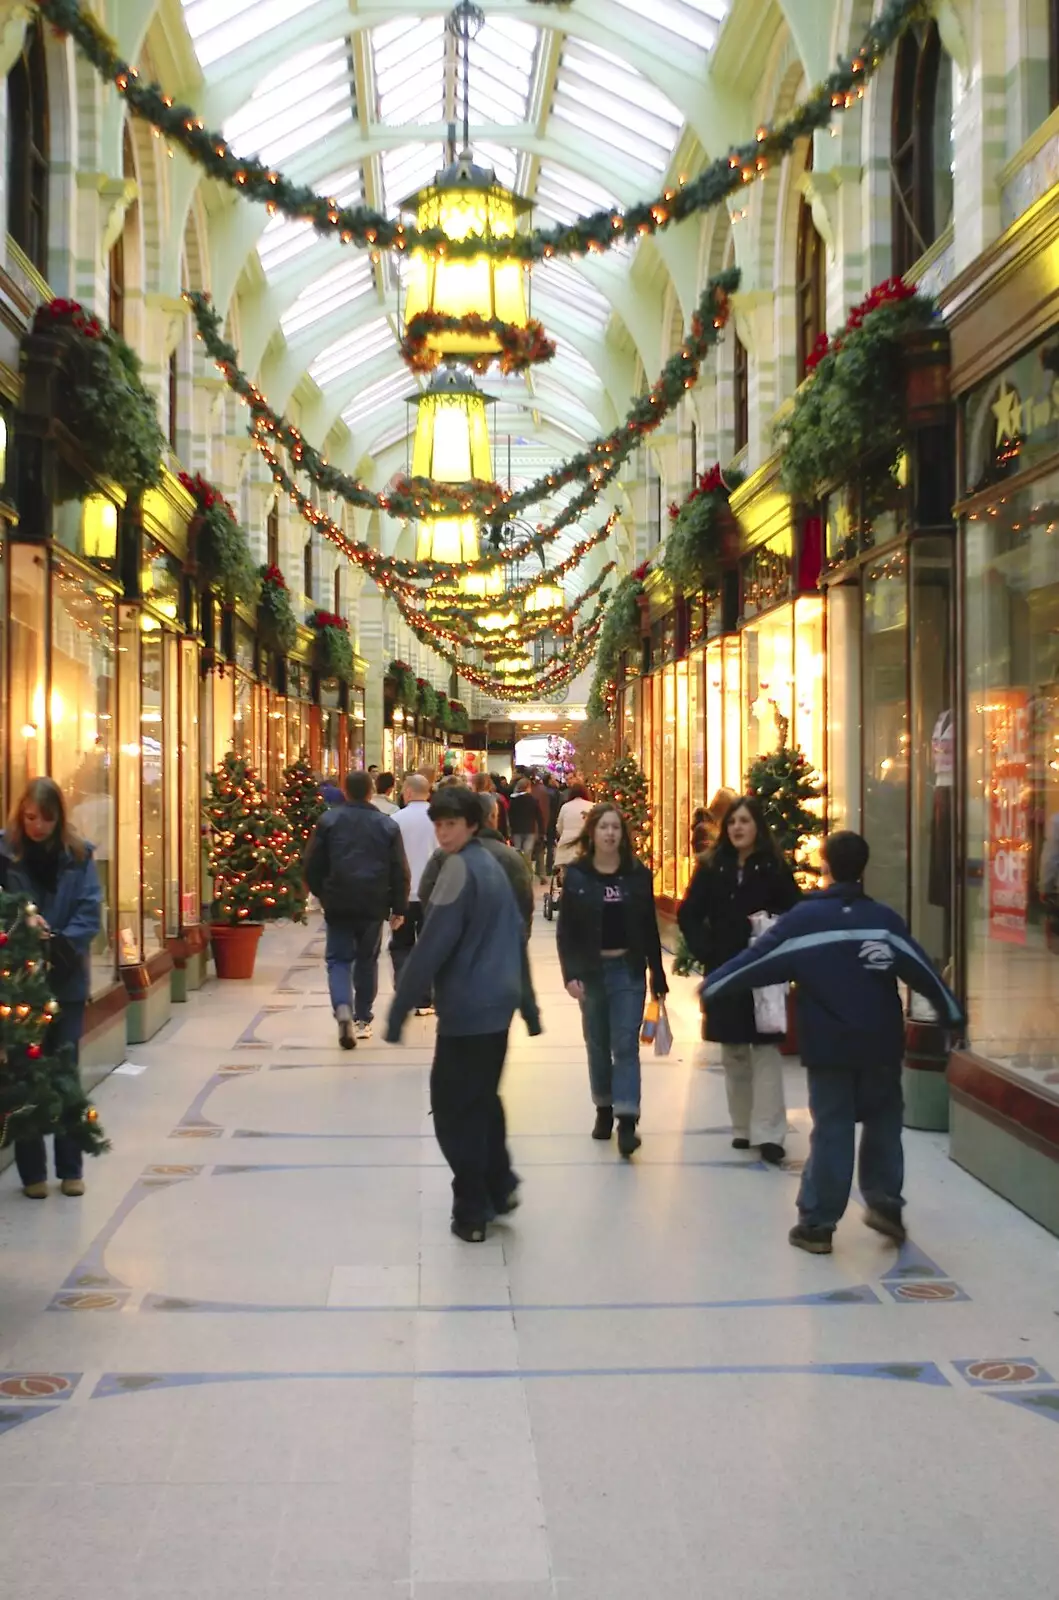 The Royal Arcade, from Christmas Shopping and a Carol Service, Norwich and Thrandeston - 19th December 2004